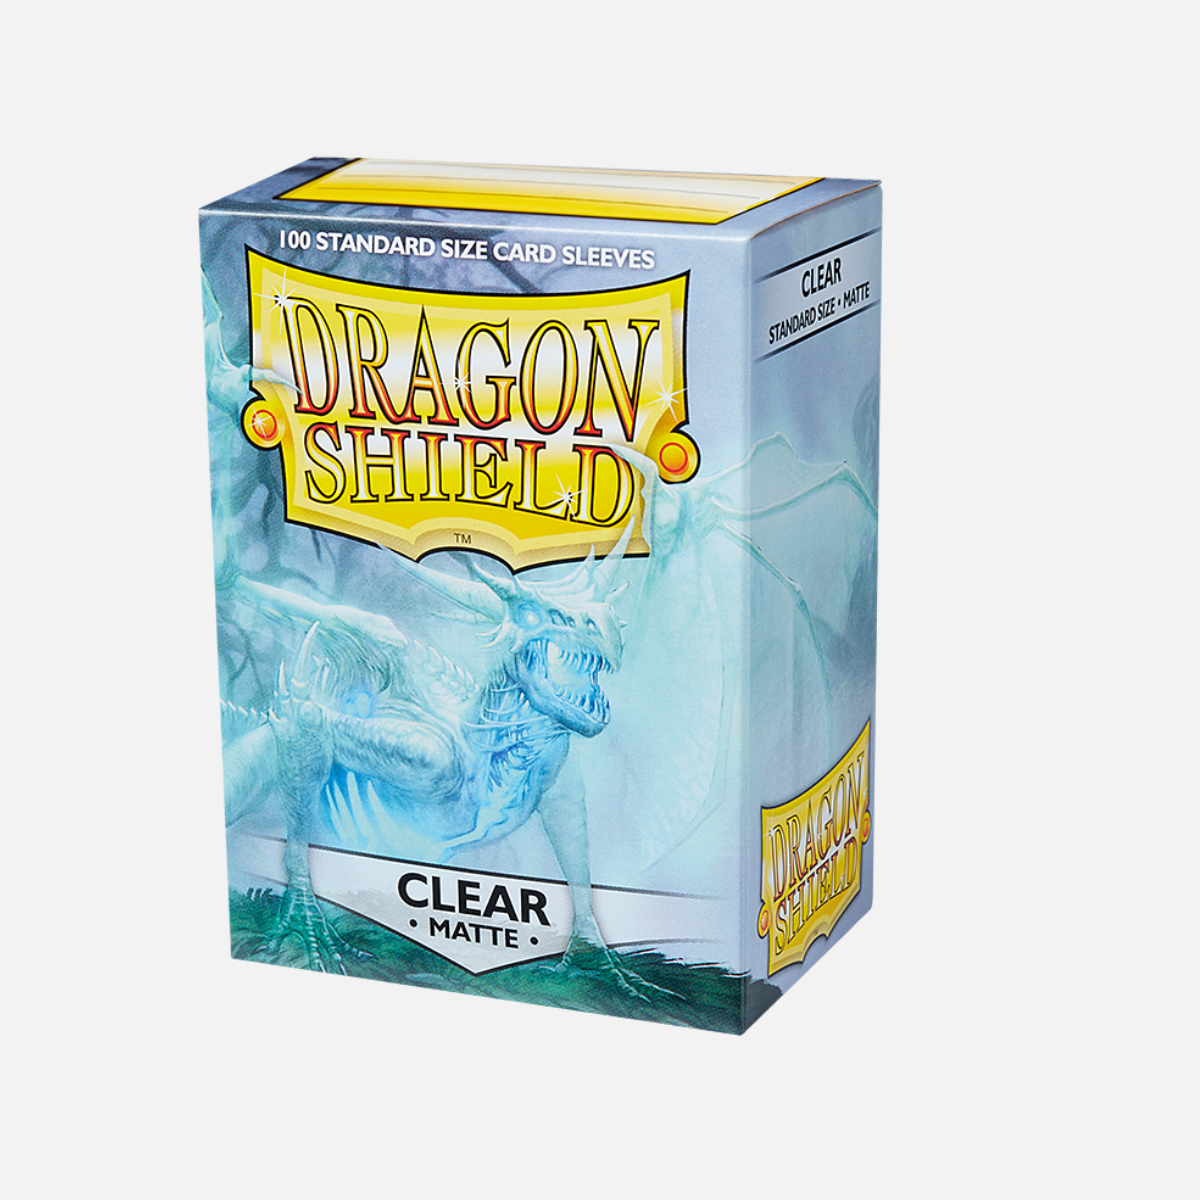 Dragon Shield card sleeves box of 100 clear matte